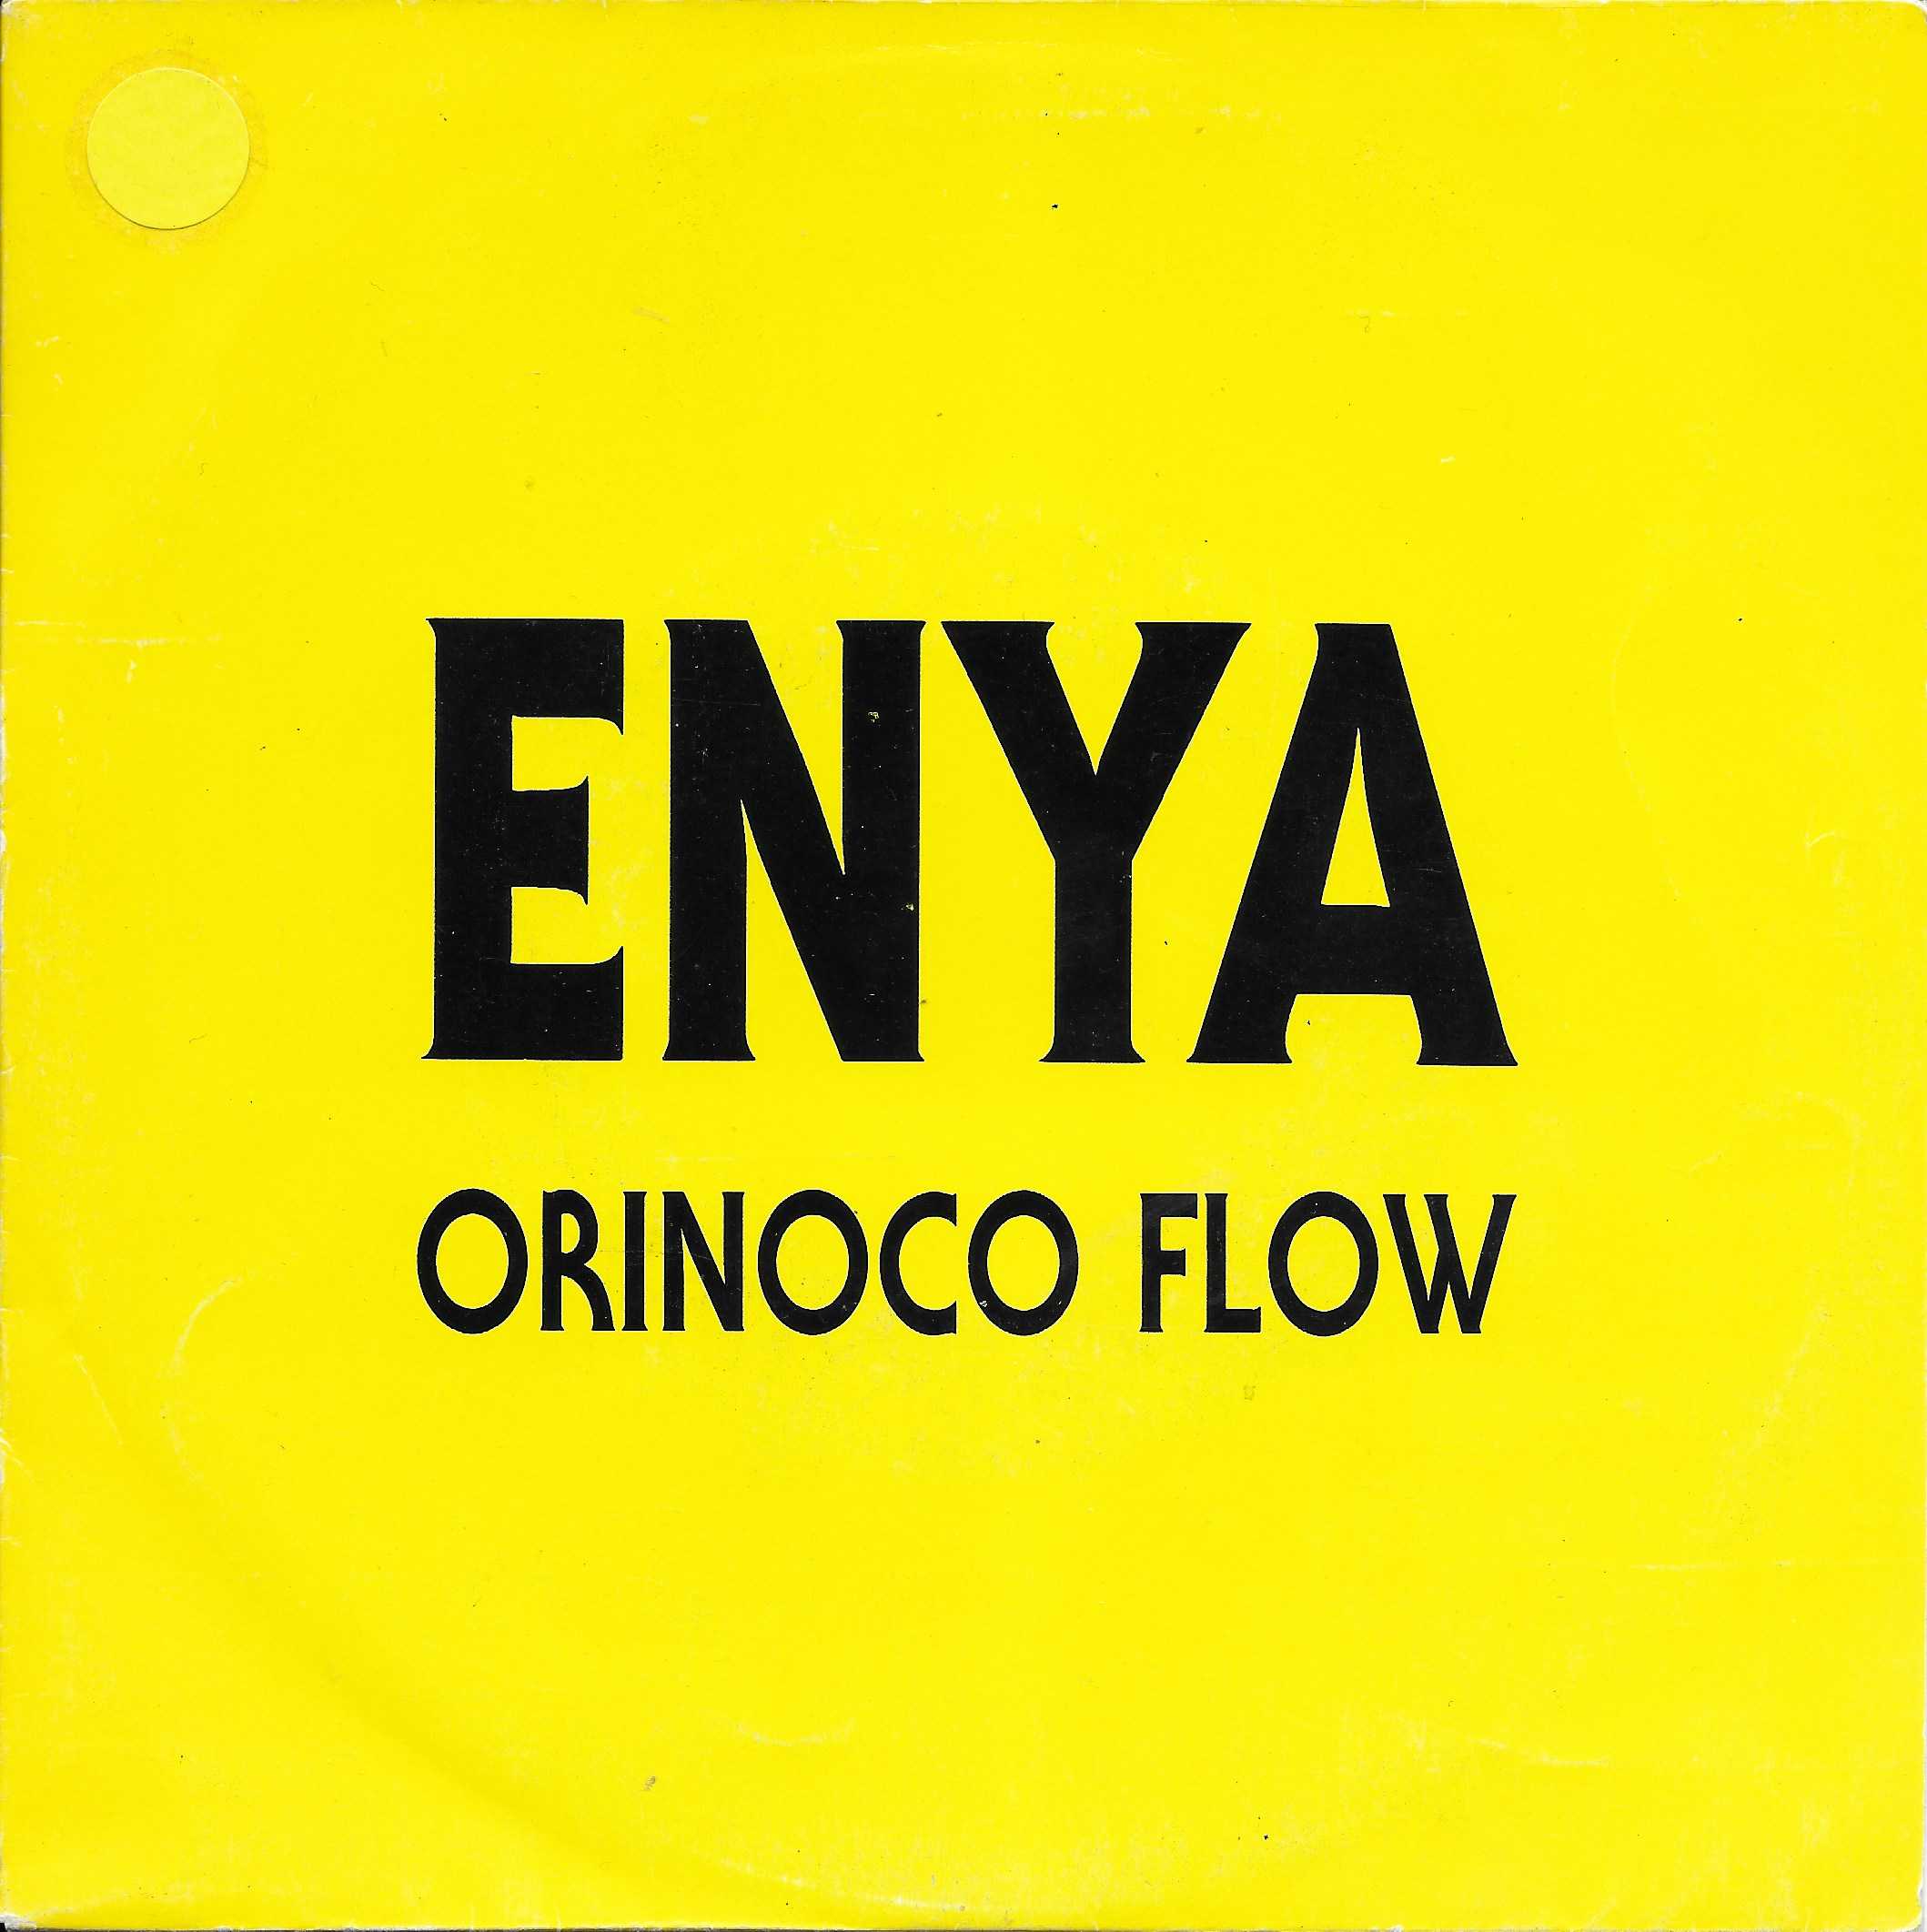 Picture of Orinoco flow by artist Enya 